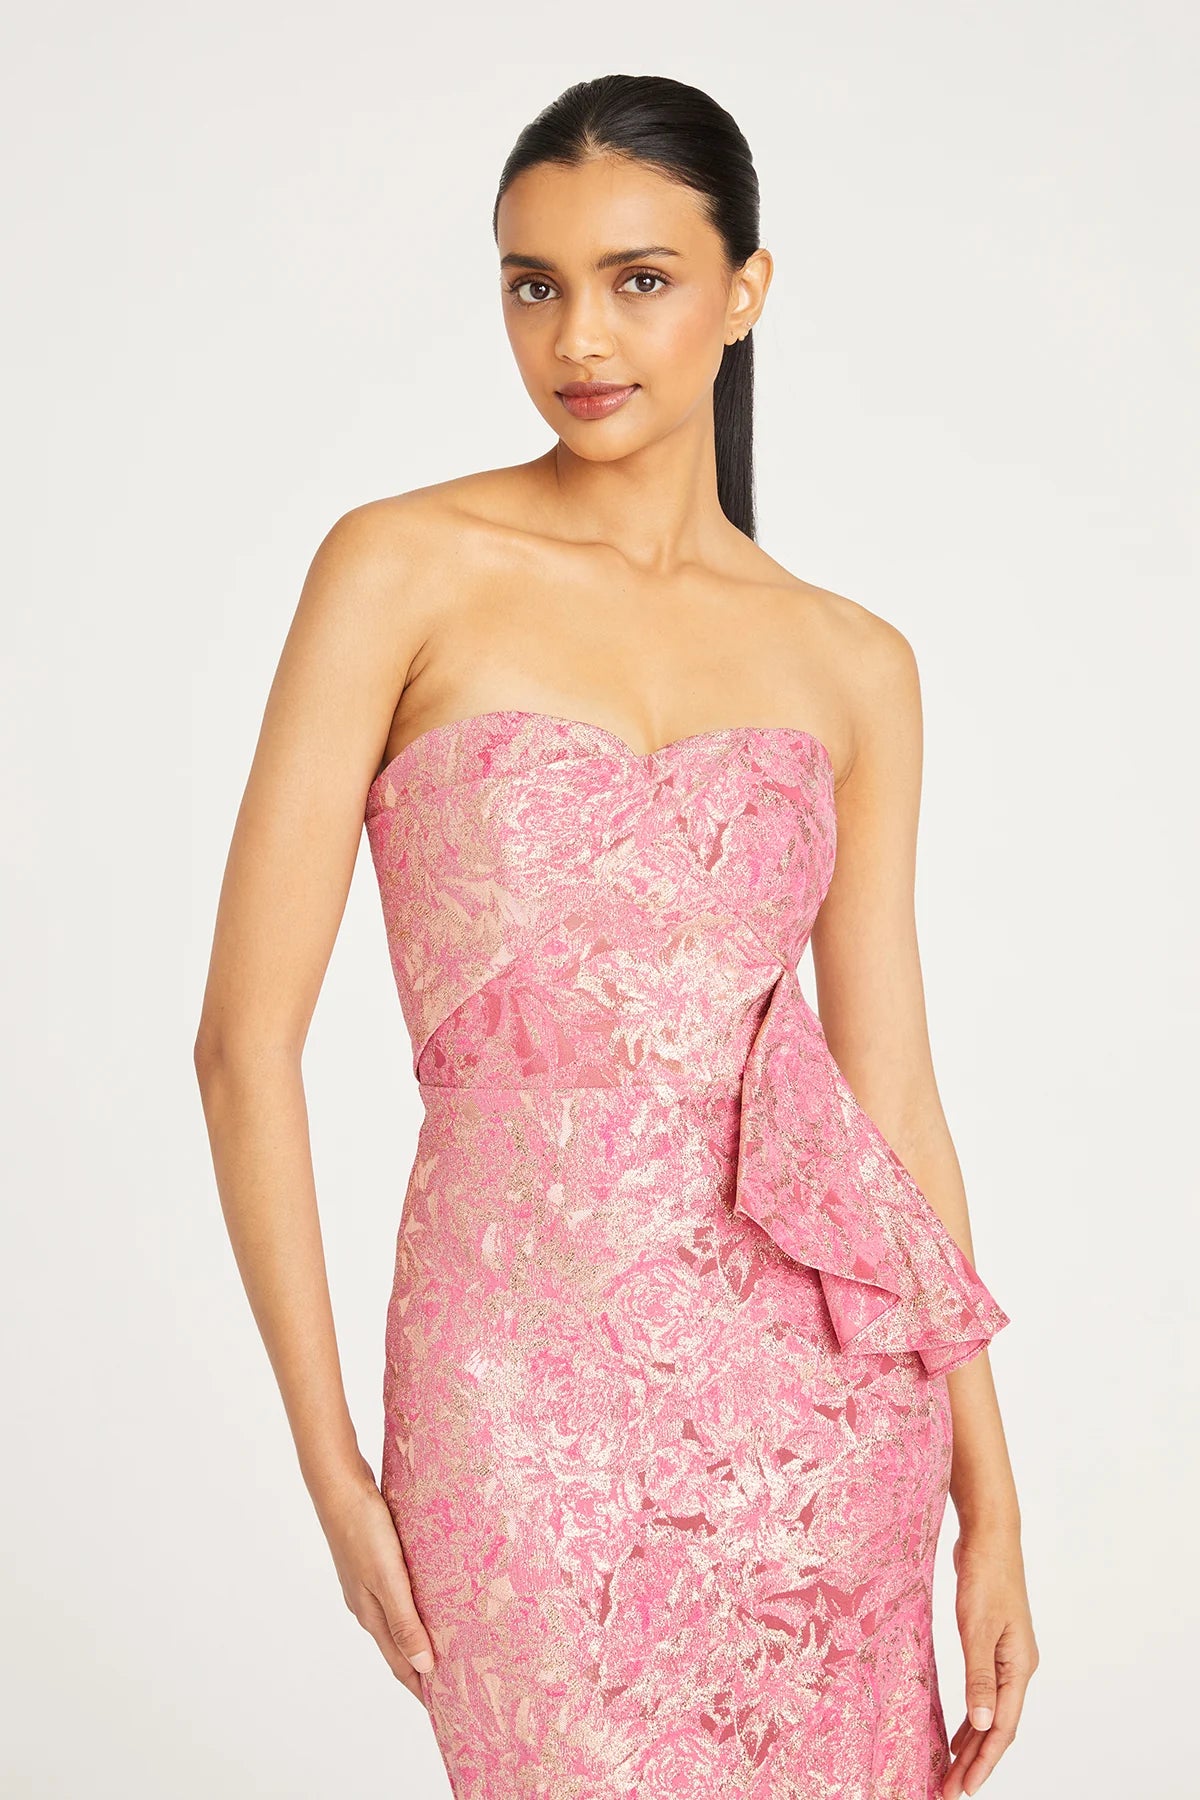 Shop the exquisite charm of Madeline's Boutique with this stunning Theia strapless dress. Style number 8819846 in camellia color. Embrace the fitted, fit-and-flare silhouette crafted from high-stretch jacquard fabric. Perfect for any occasion. Visit our Toronto and Boca Raton locations for a personalized shopping experience.